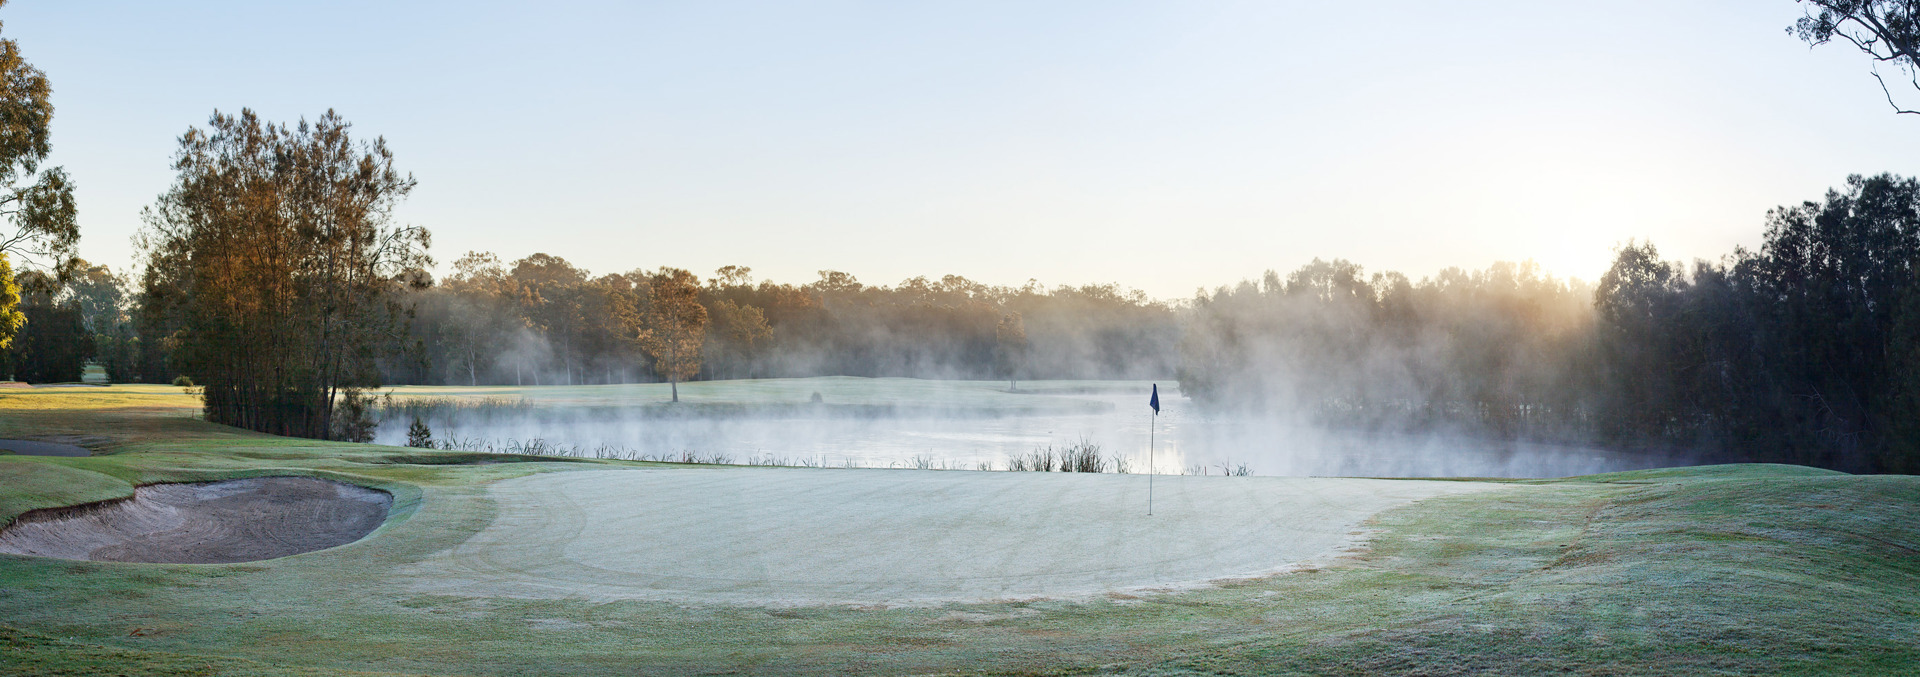 Landscape shot of Gainsborough Greens golf course and flag stick with steamy lake in background